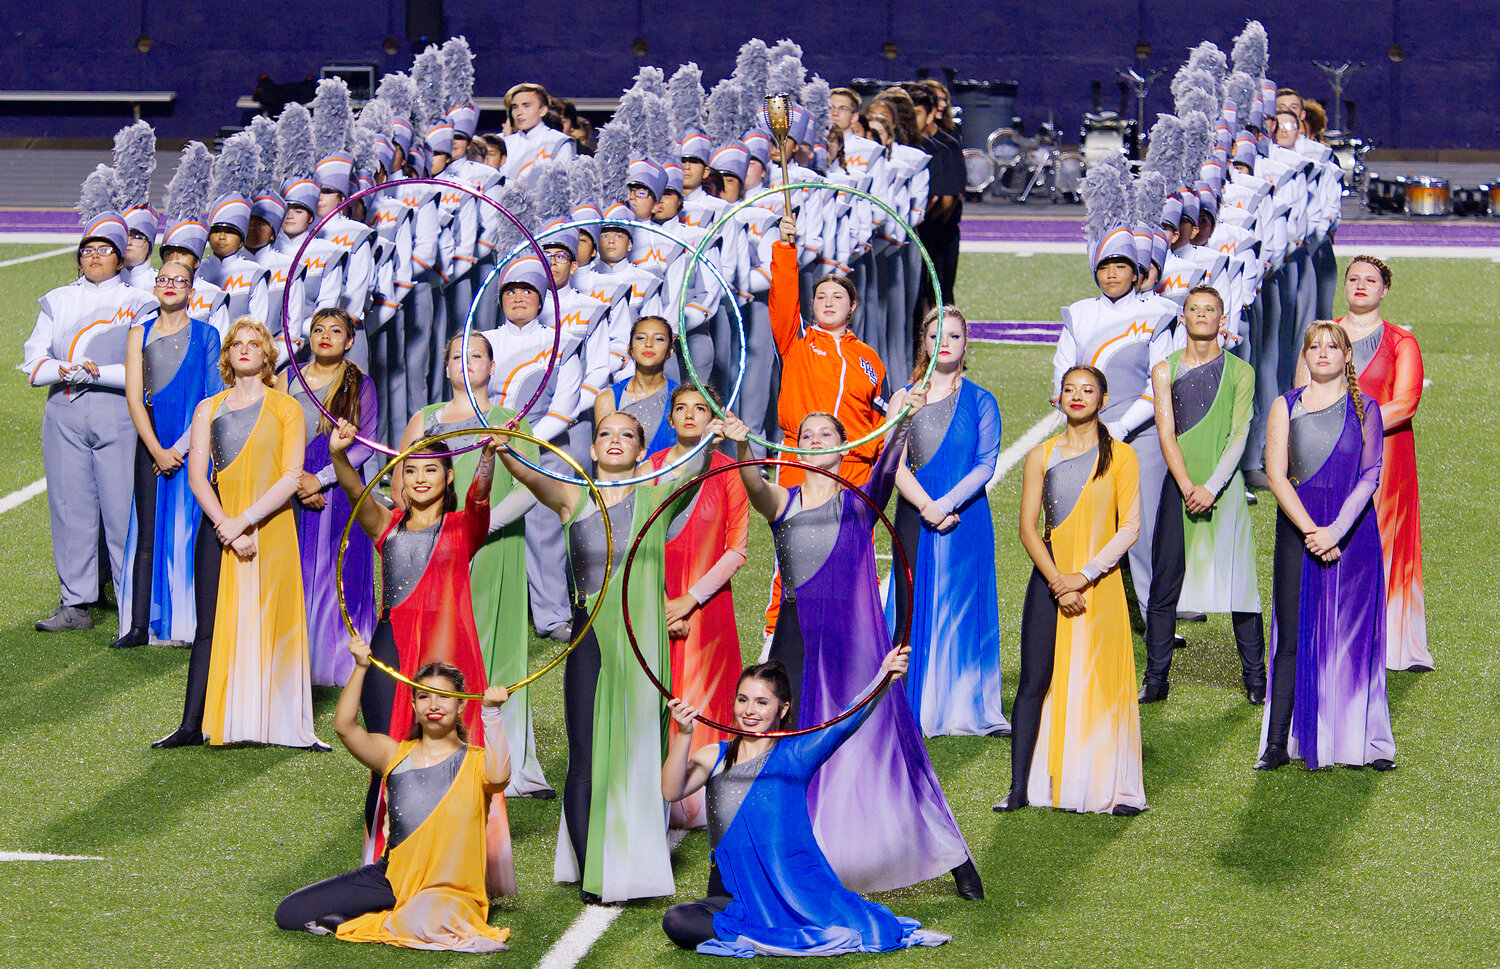 The Mineola Sound of the Swarm is announced as area champions Saturday at Stephen F. Austin State University in Nacogdoches to qualify for state marching contest. They will also perform Sunday at 4 p.m. at Meredith stadium. [see additional area shots]